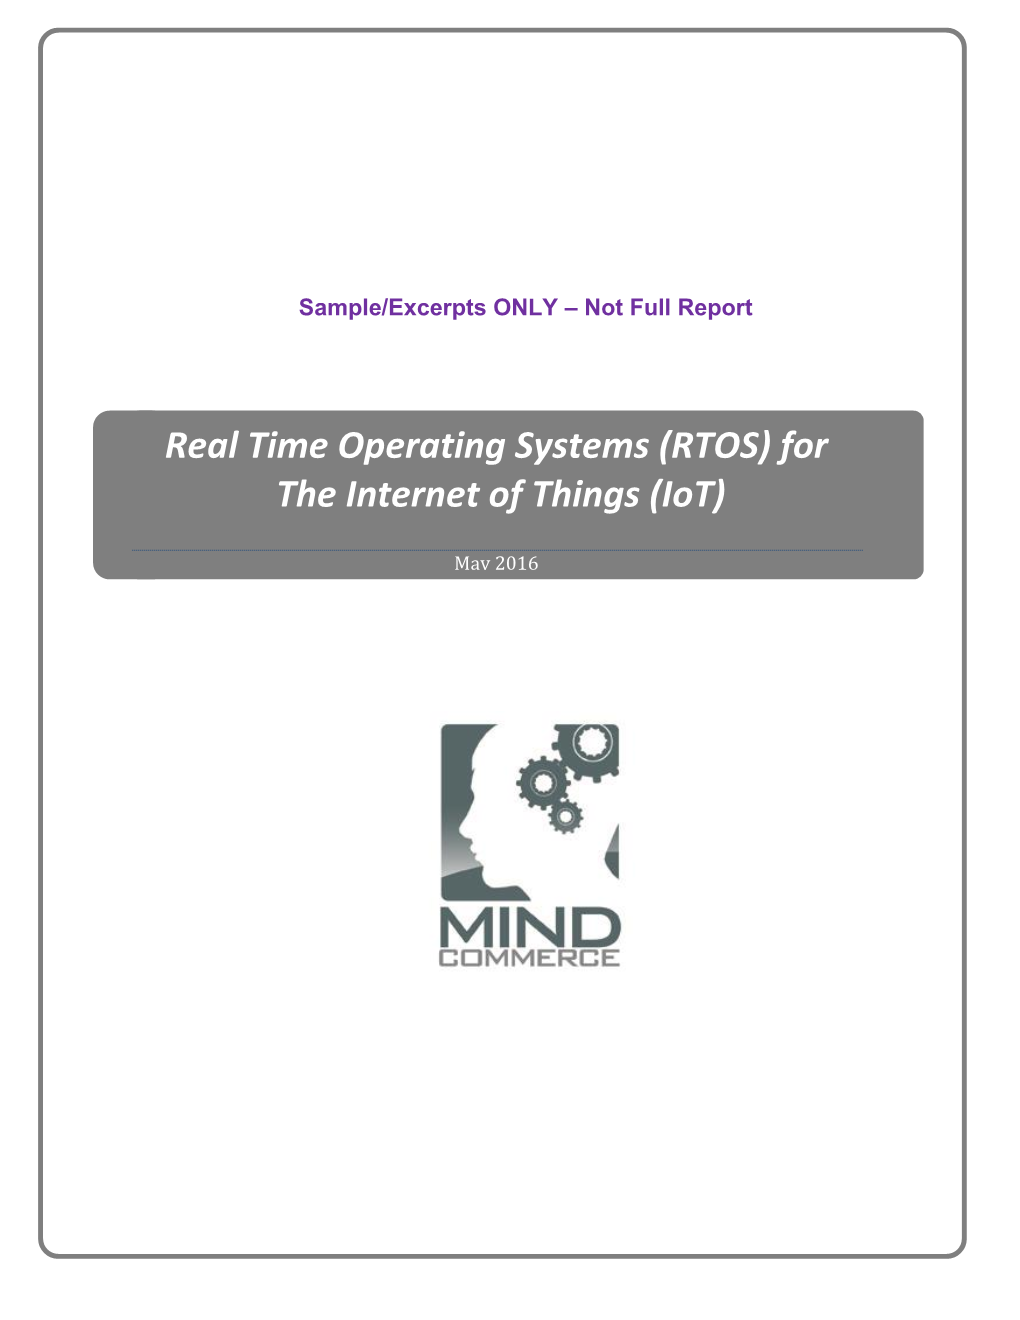 Real Time Operating Systems (RTOS) for the Internet of Things (Iot)